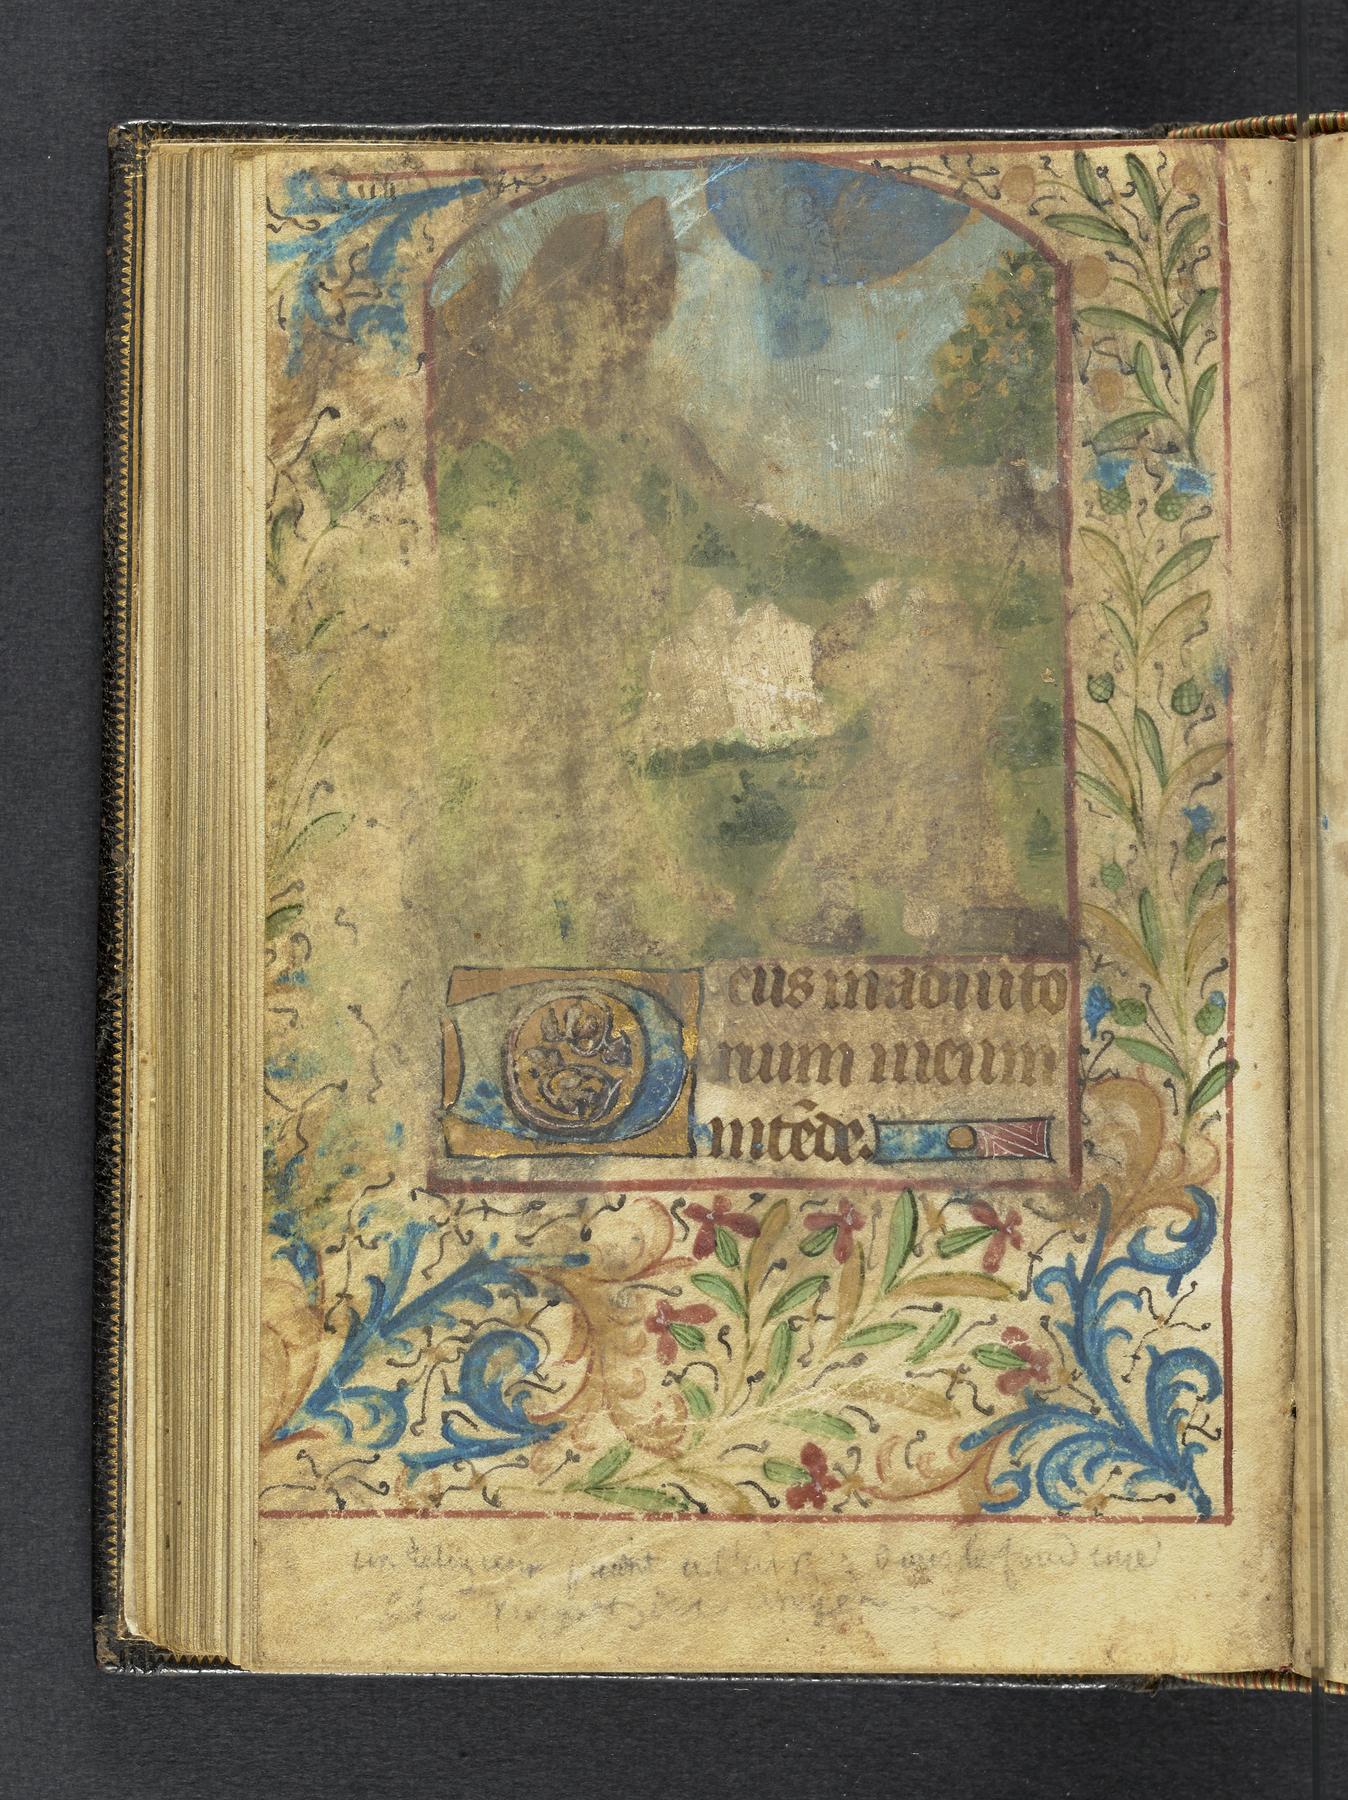 Coffee with a Codex: Reconstructed book of hours